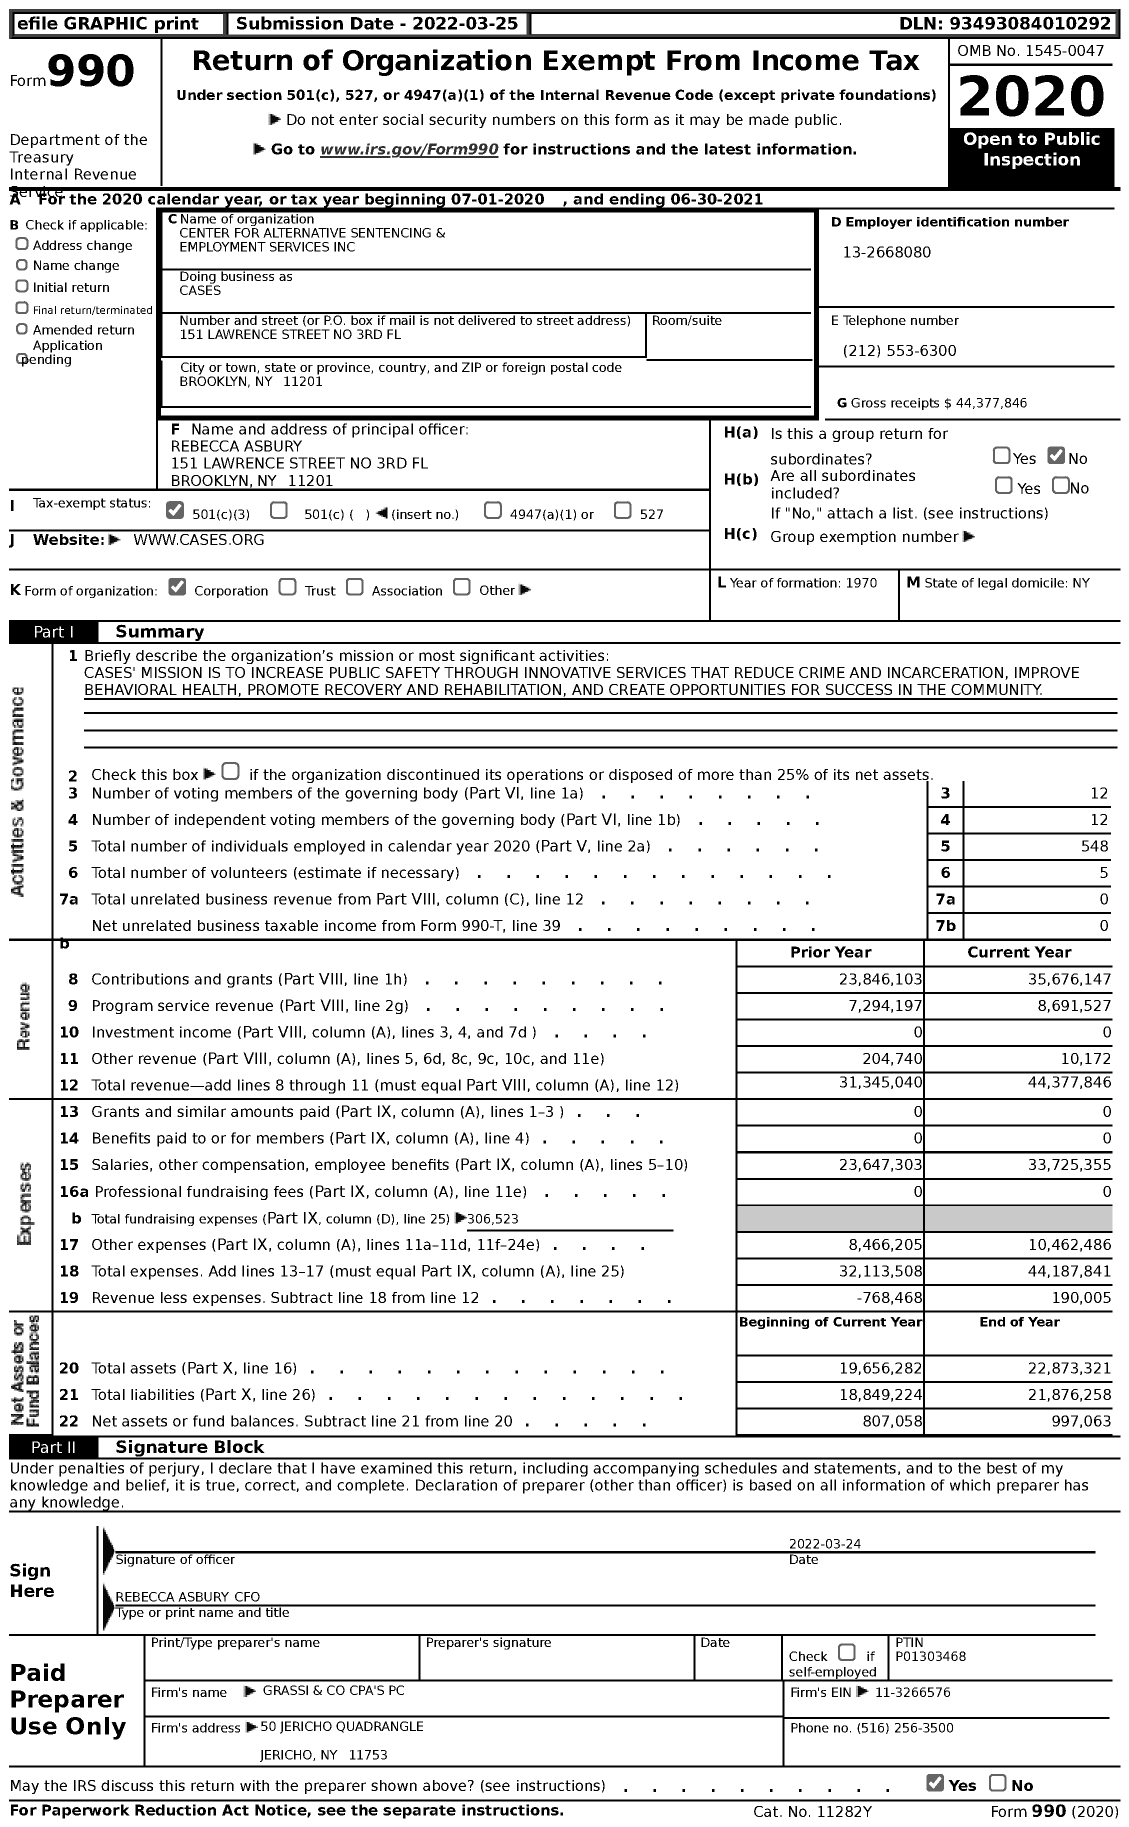 Image of first page of 2020 Form 990 for Center for Alternative Sentencing and Employment Services (CASES)